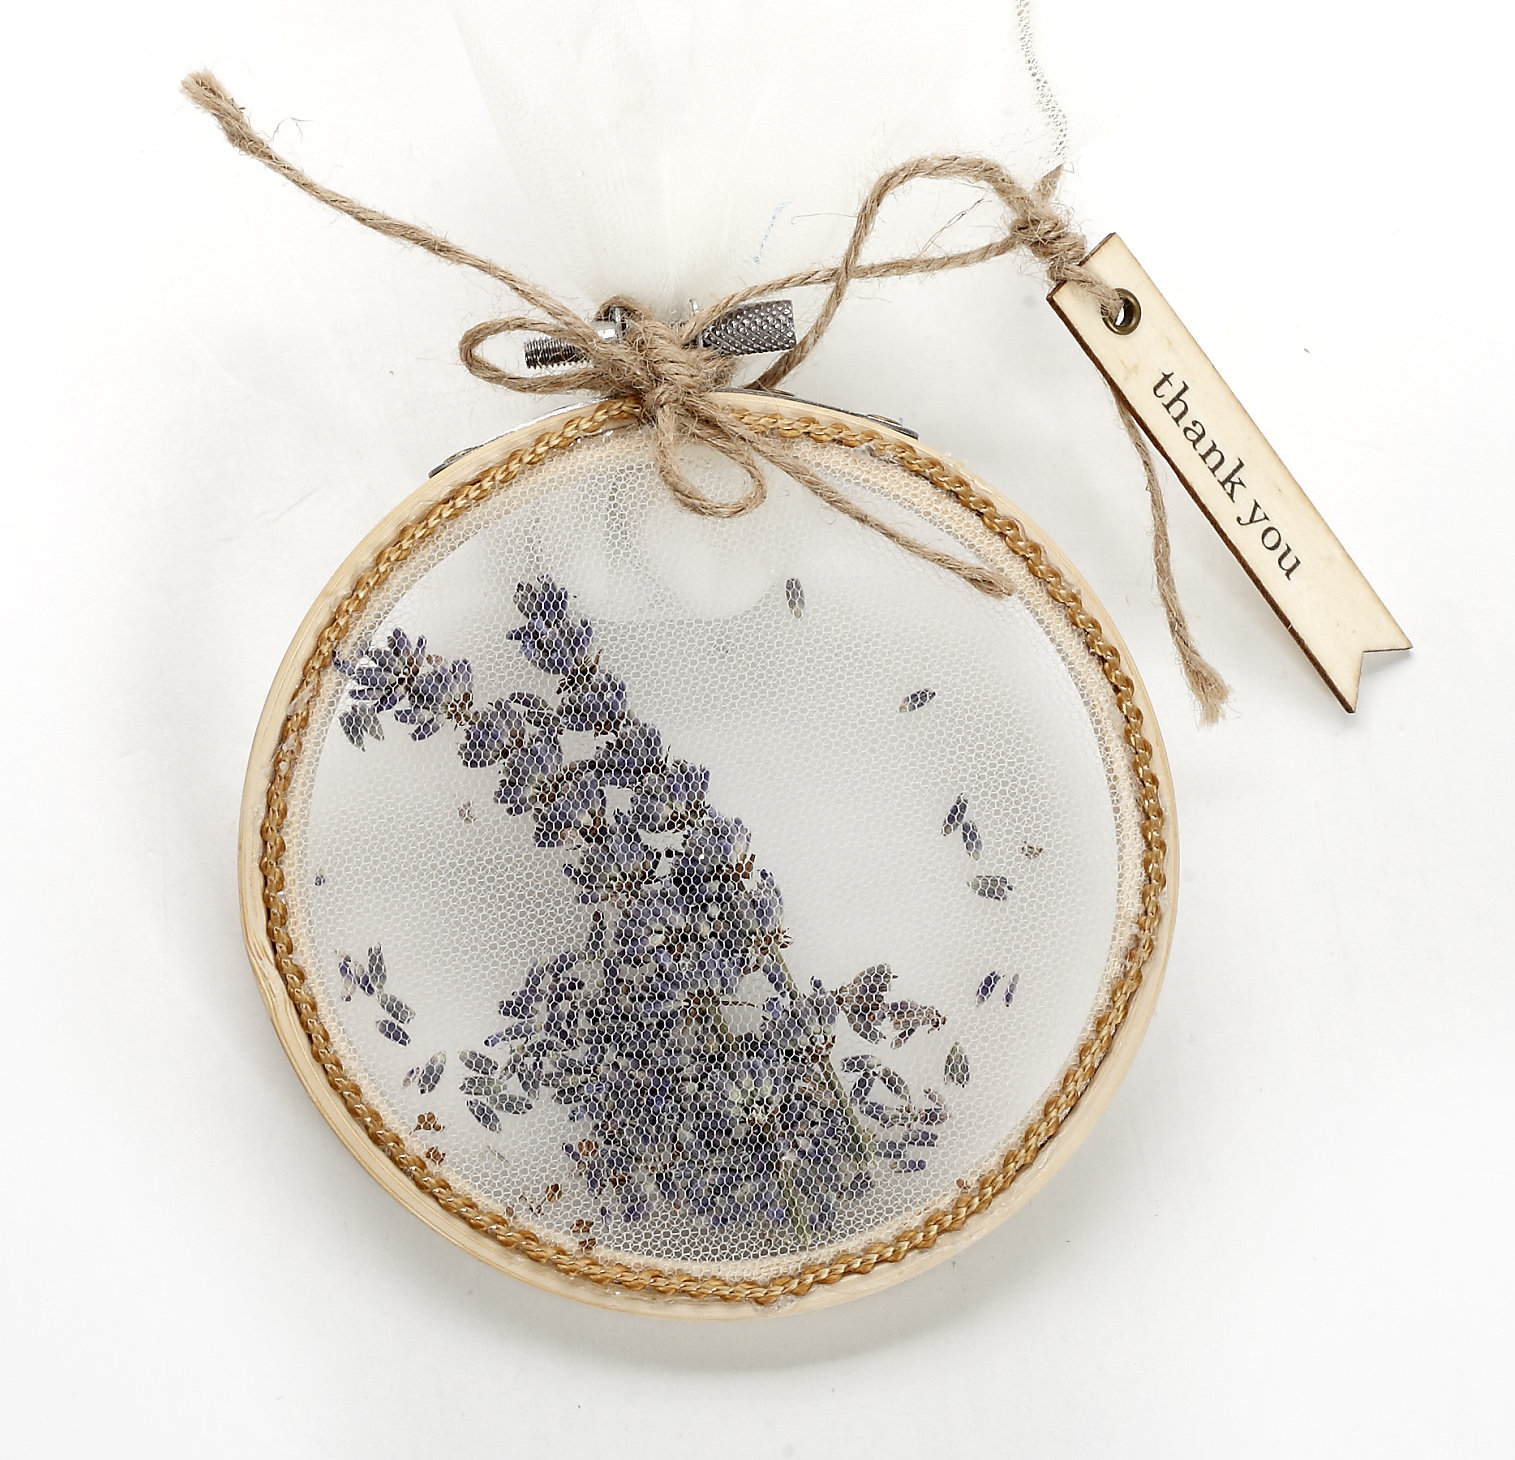 Scented favor with lavender